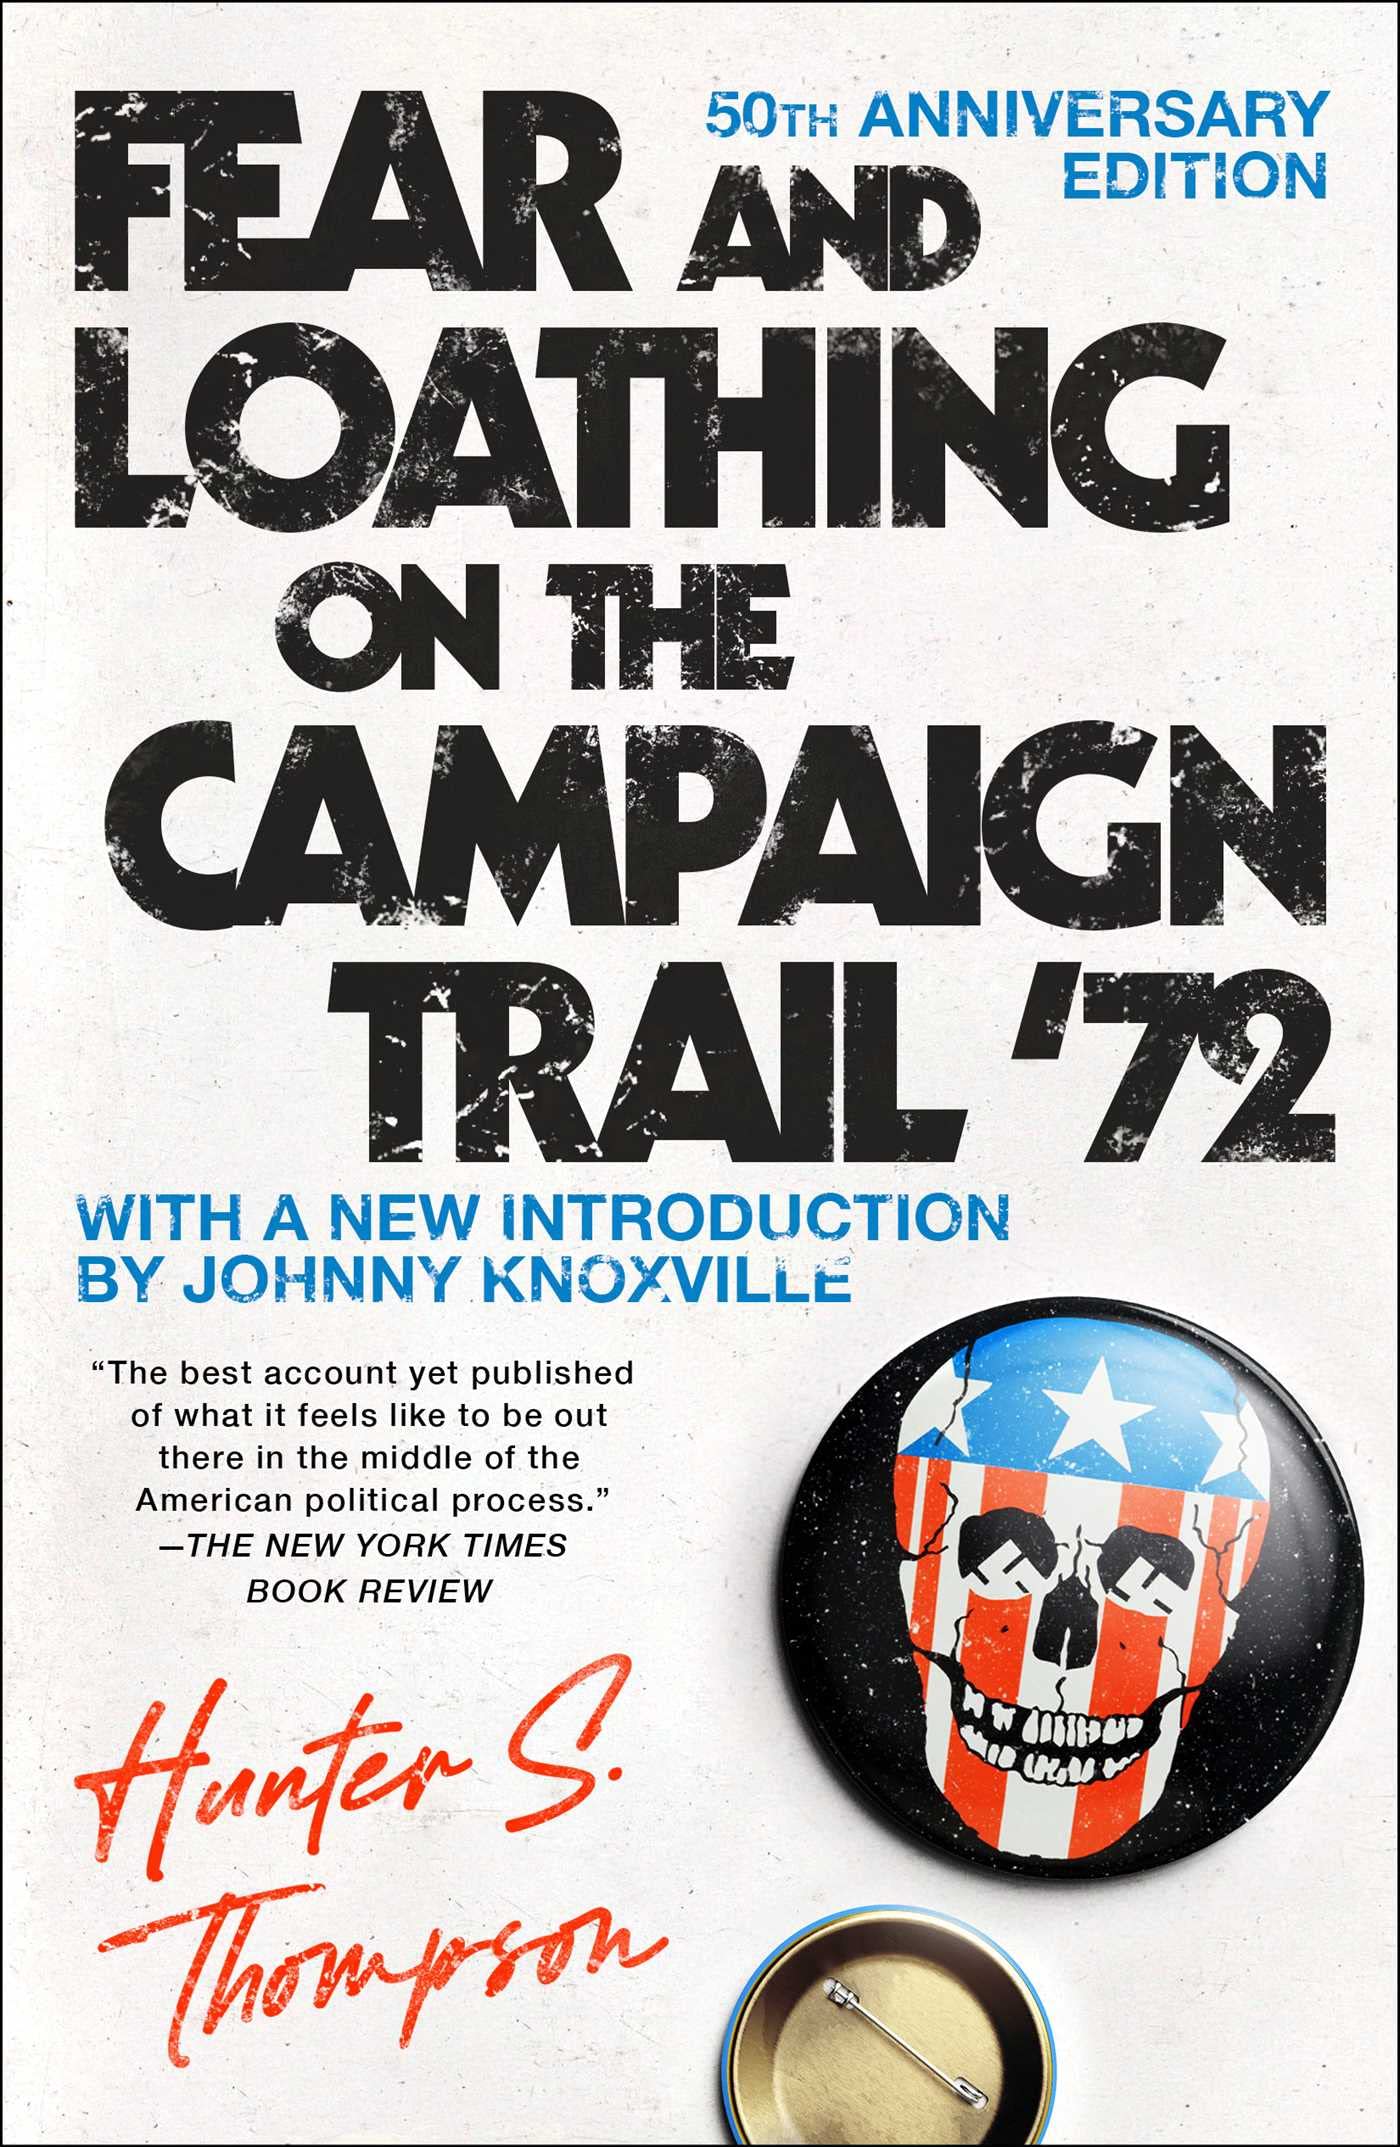 Fear and Loathing on the Campaign Trail '72, by Hunter S. Thompson